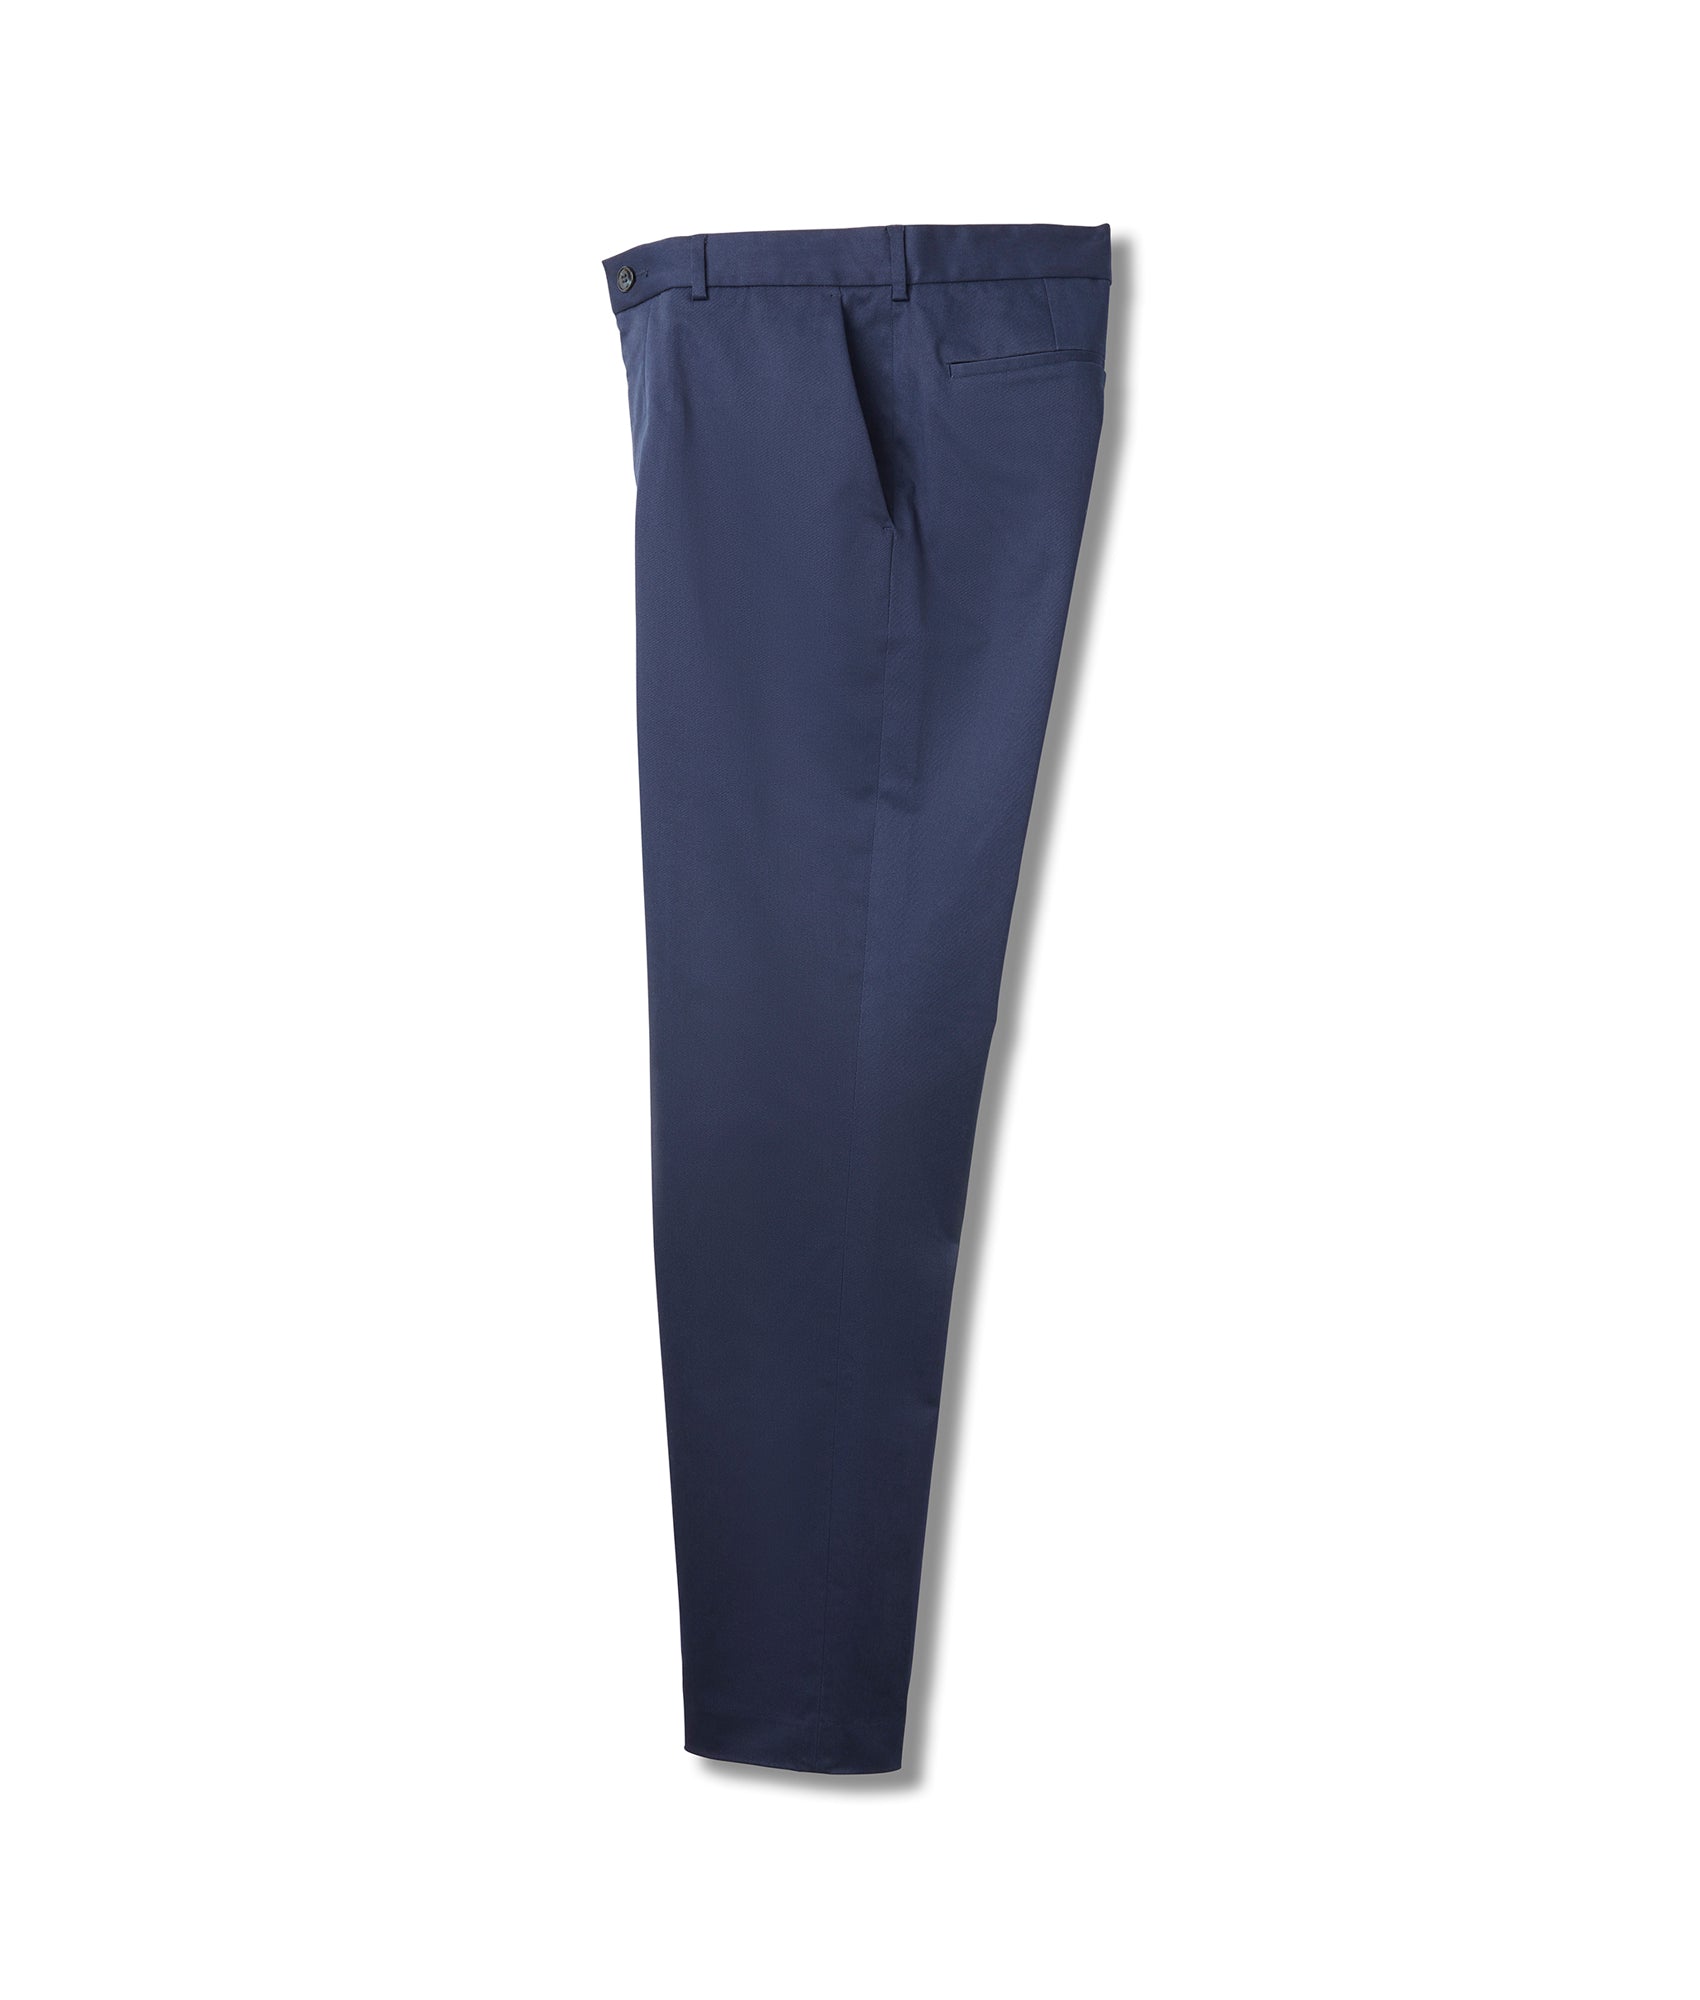 Solid ‘Fordham’ Flat Front Easy-Care Chino Twill Pant with Magnetic Closures in Navy